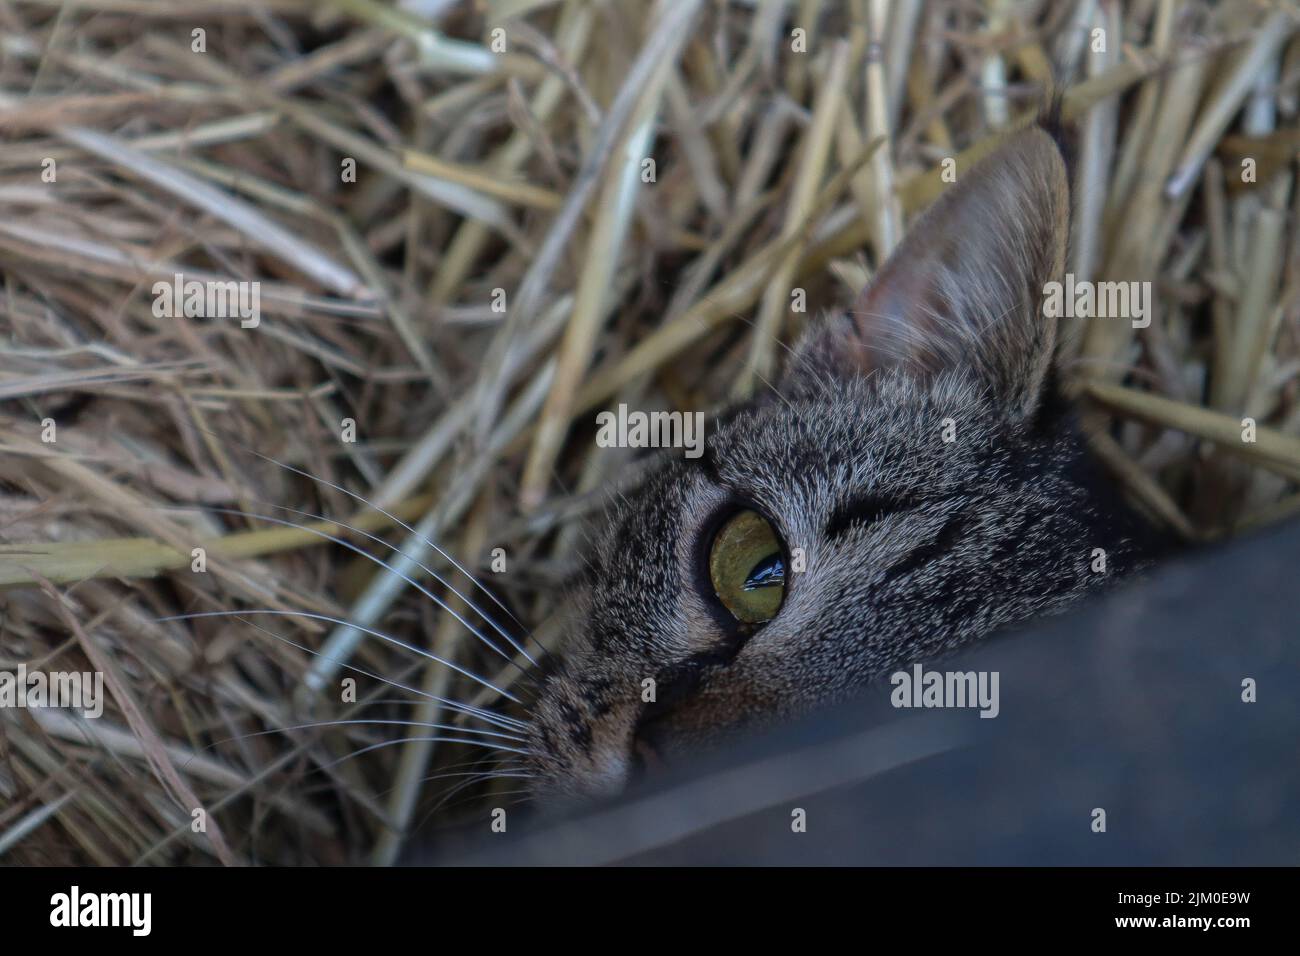 A closeup of half of the face of a green-eyed cat on the dry grass Stock Photo